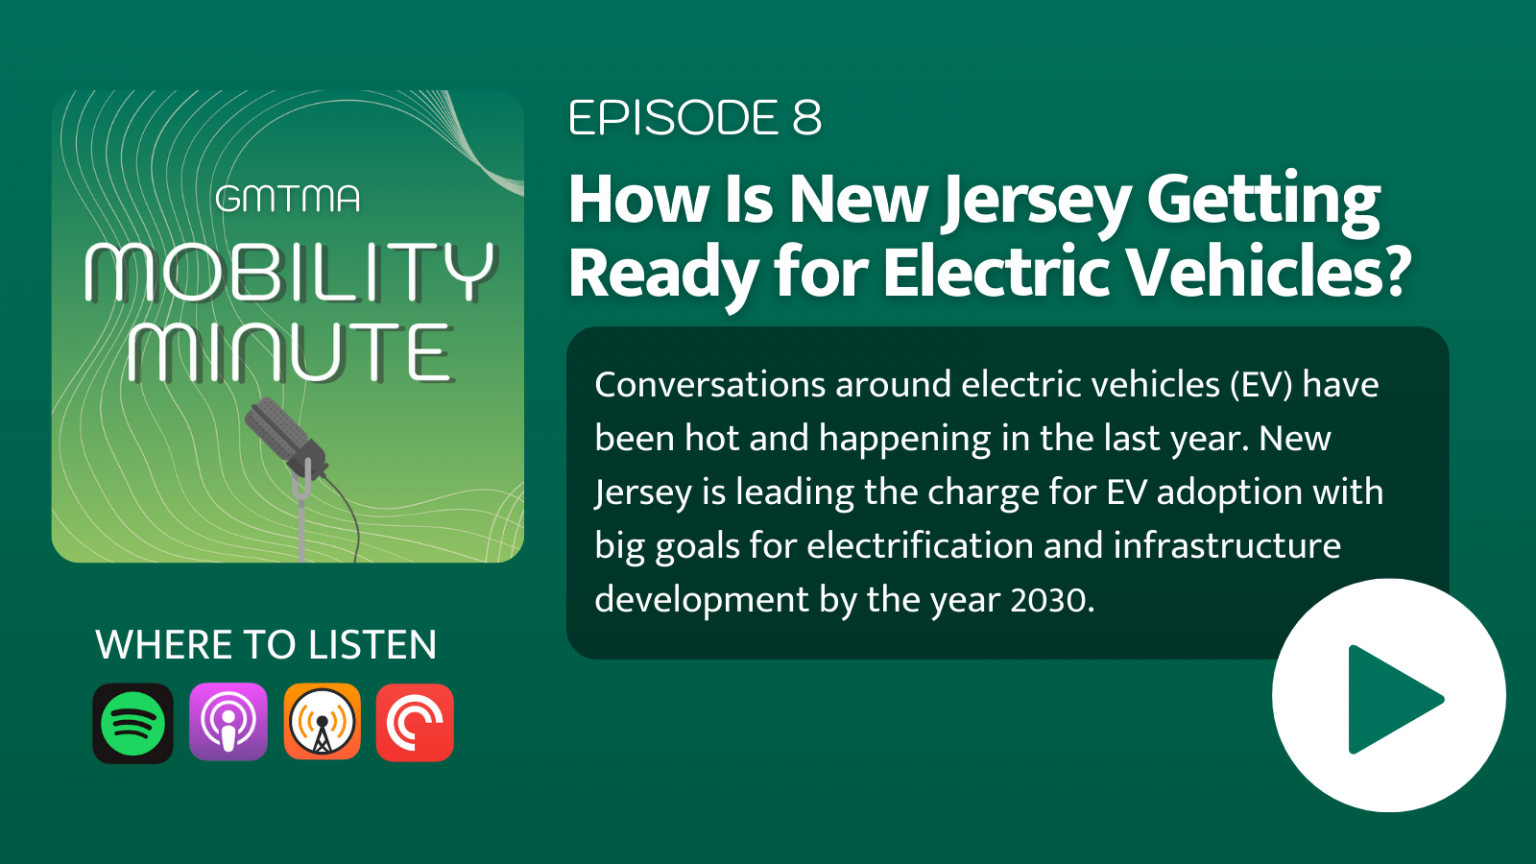 where-are-electric-vehicle-charging-stations-needed-in-nj-explore